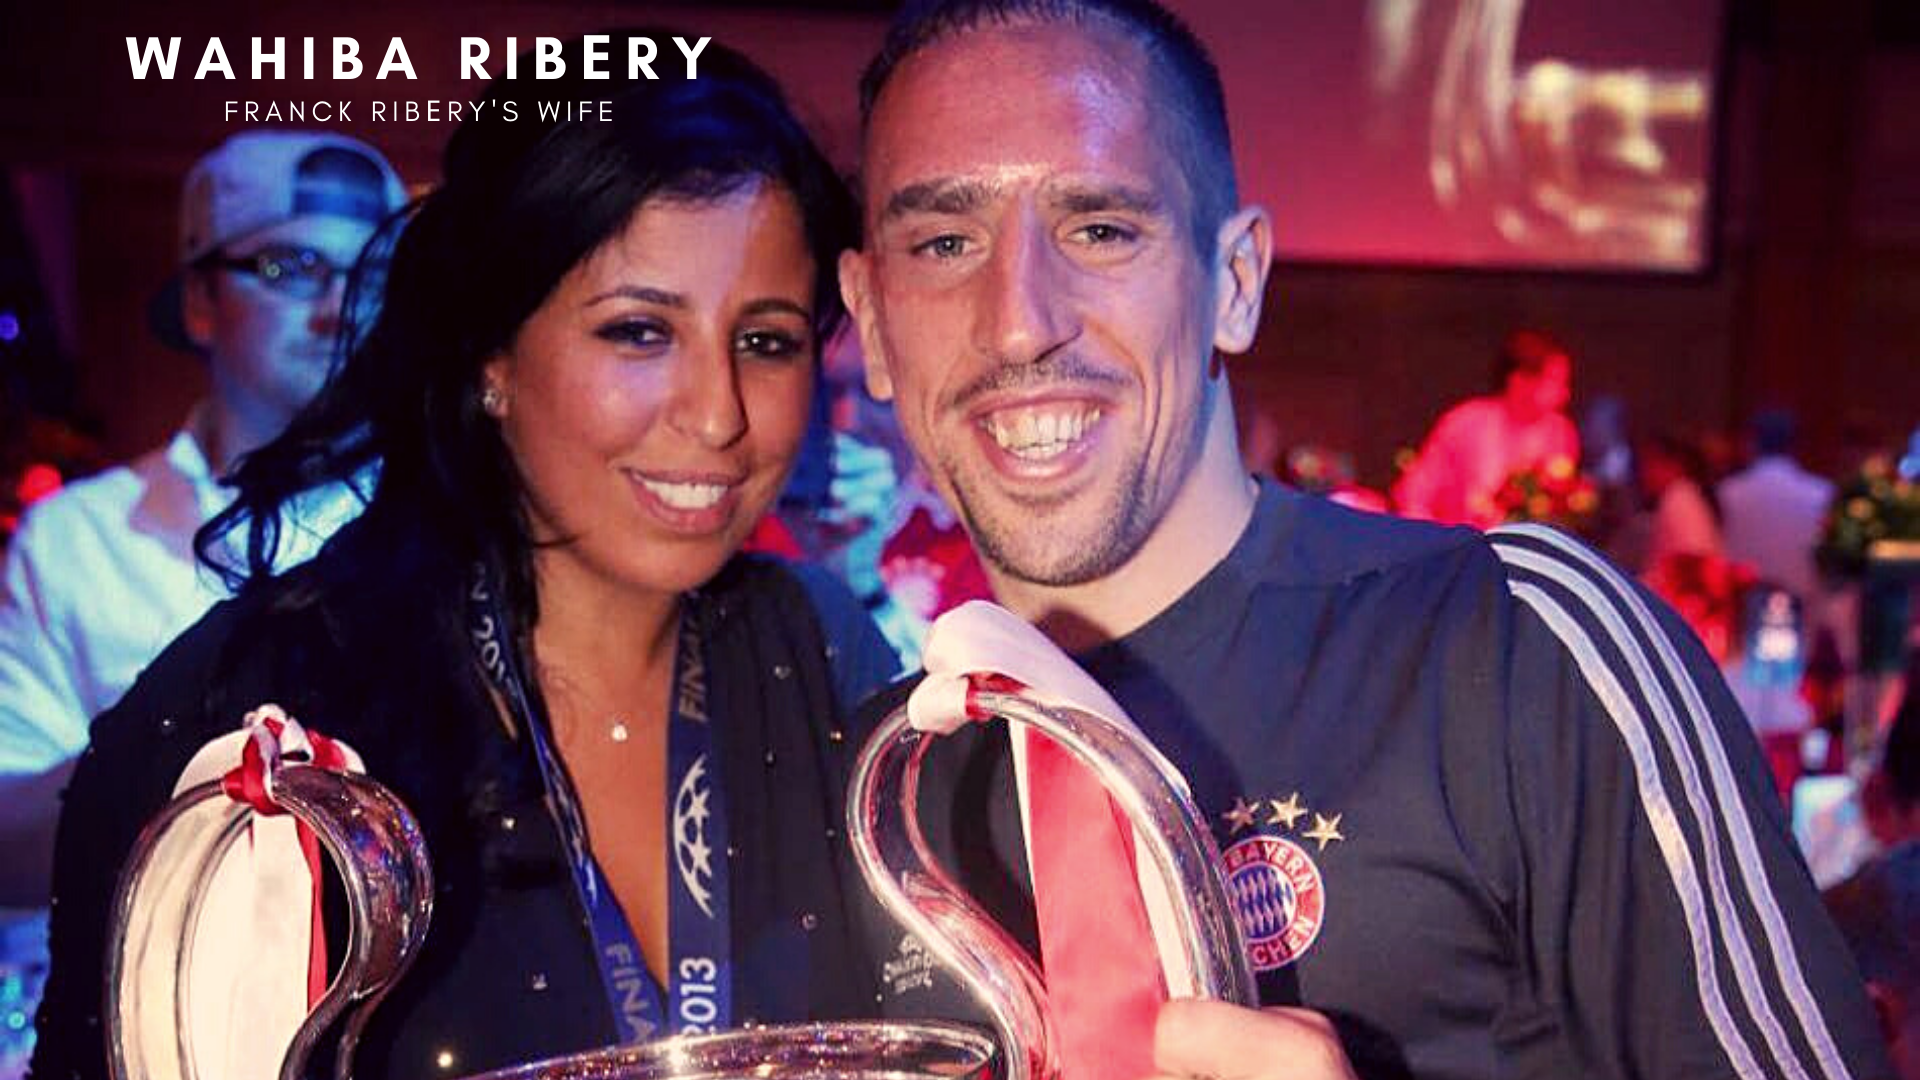 Franck Ribеry with his wife Wahiba Ribеry. (Credit: Instagram)